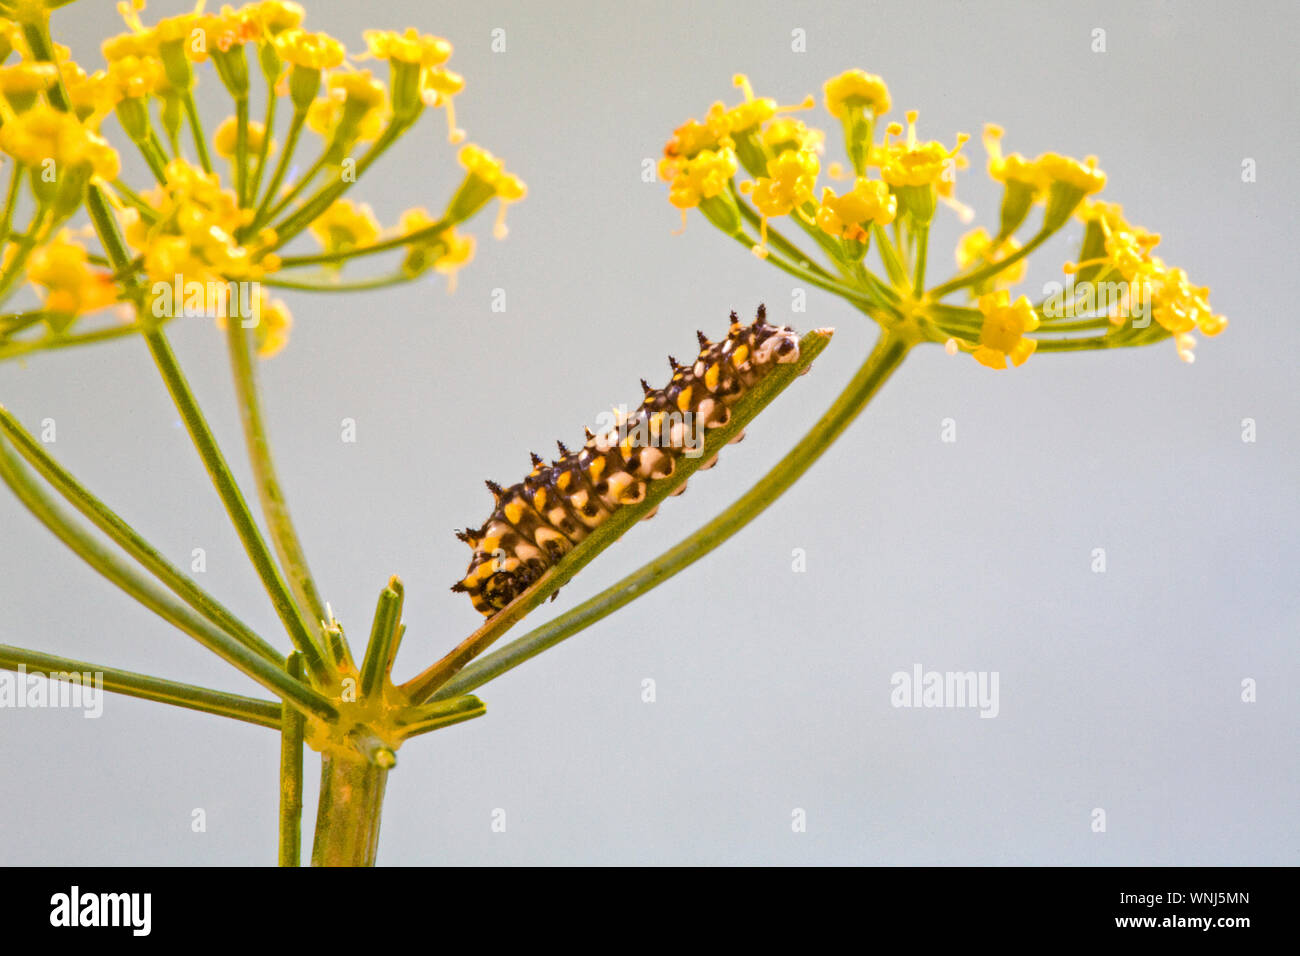 The tiny second instar caterpillar of an Anise Swallowtail butterfly on a flower stem on a Dill plant. About one-quarter of an inch in length. Stock Photo